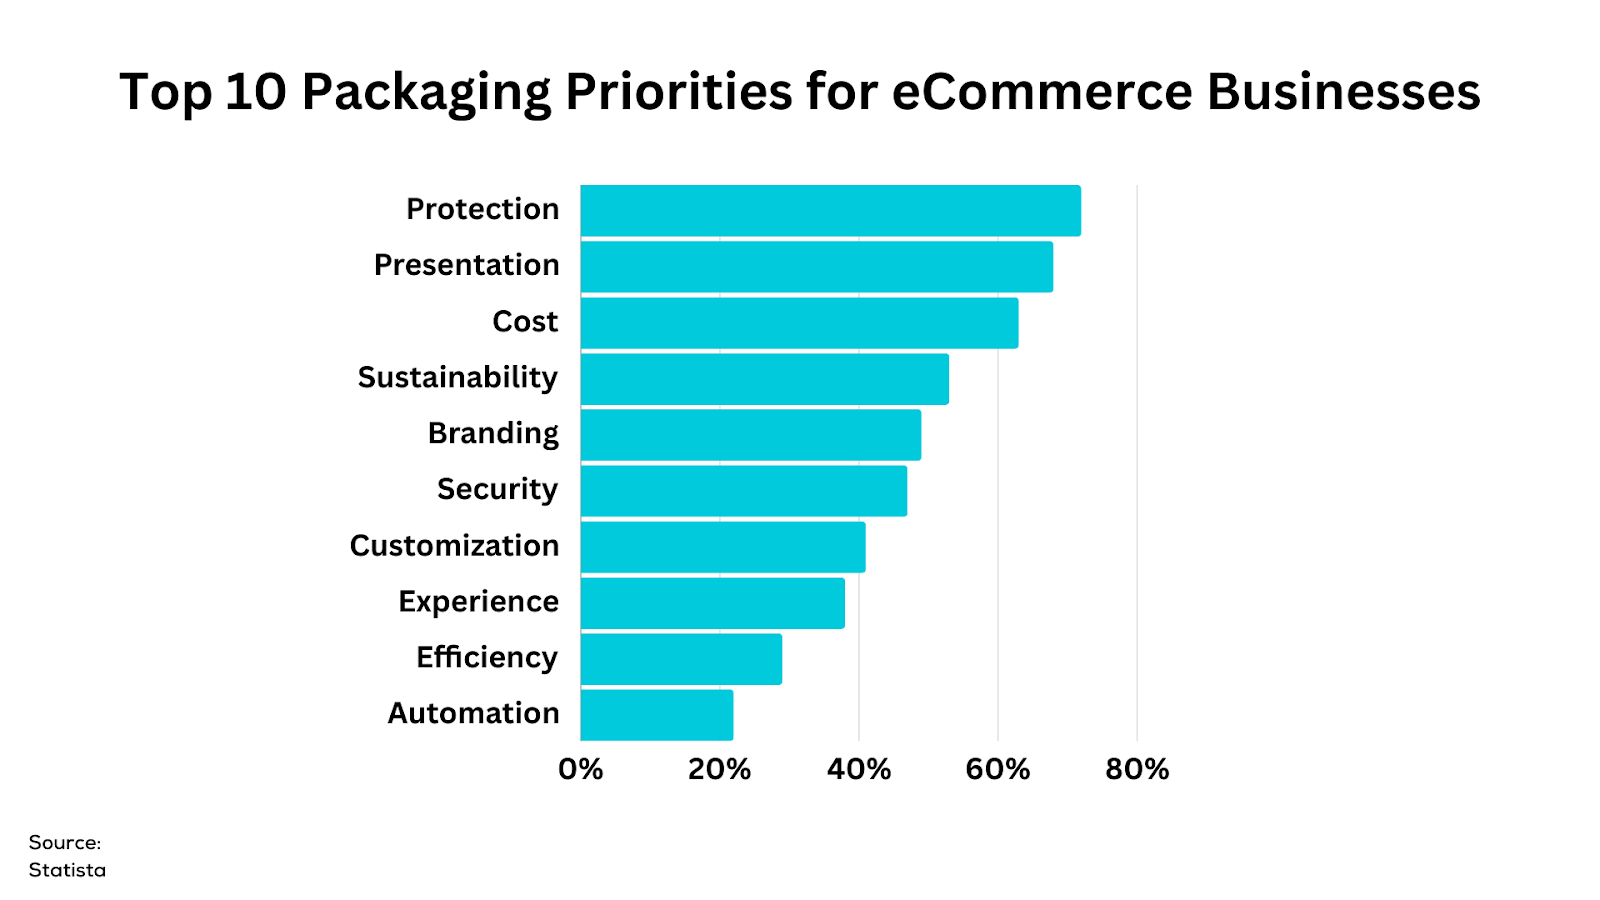 Top 10 Packaging Priorities for eCommerce Businesses